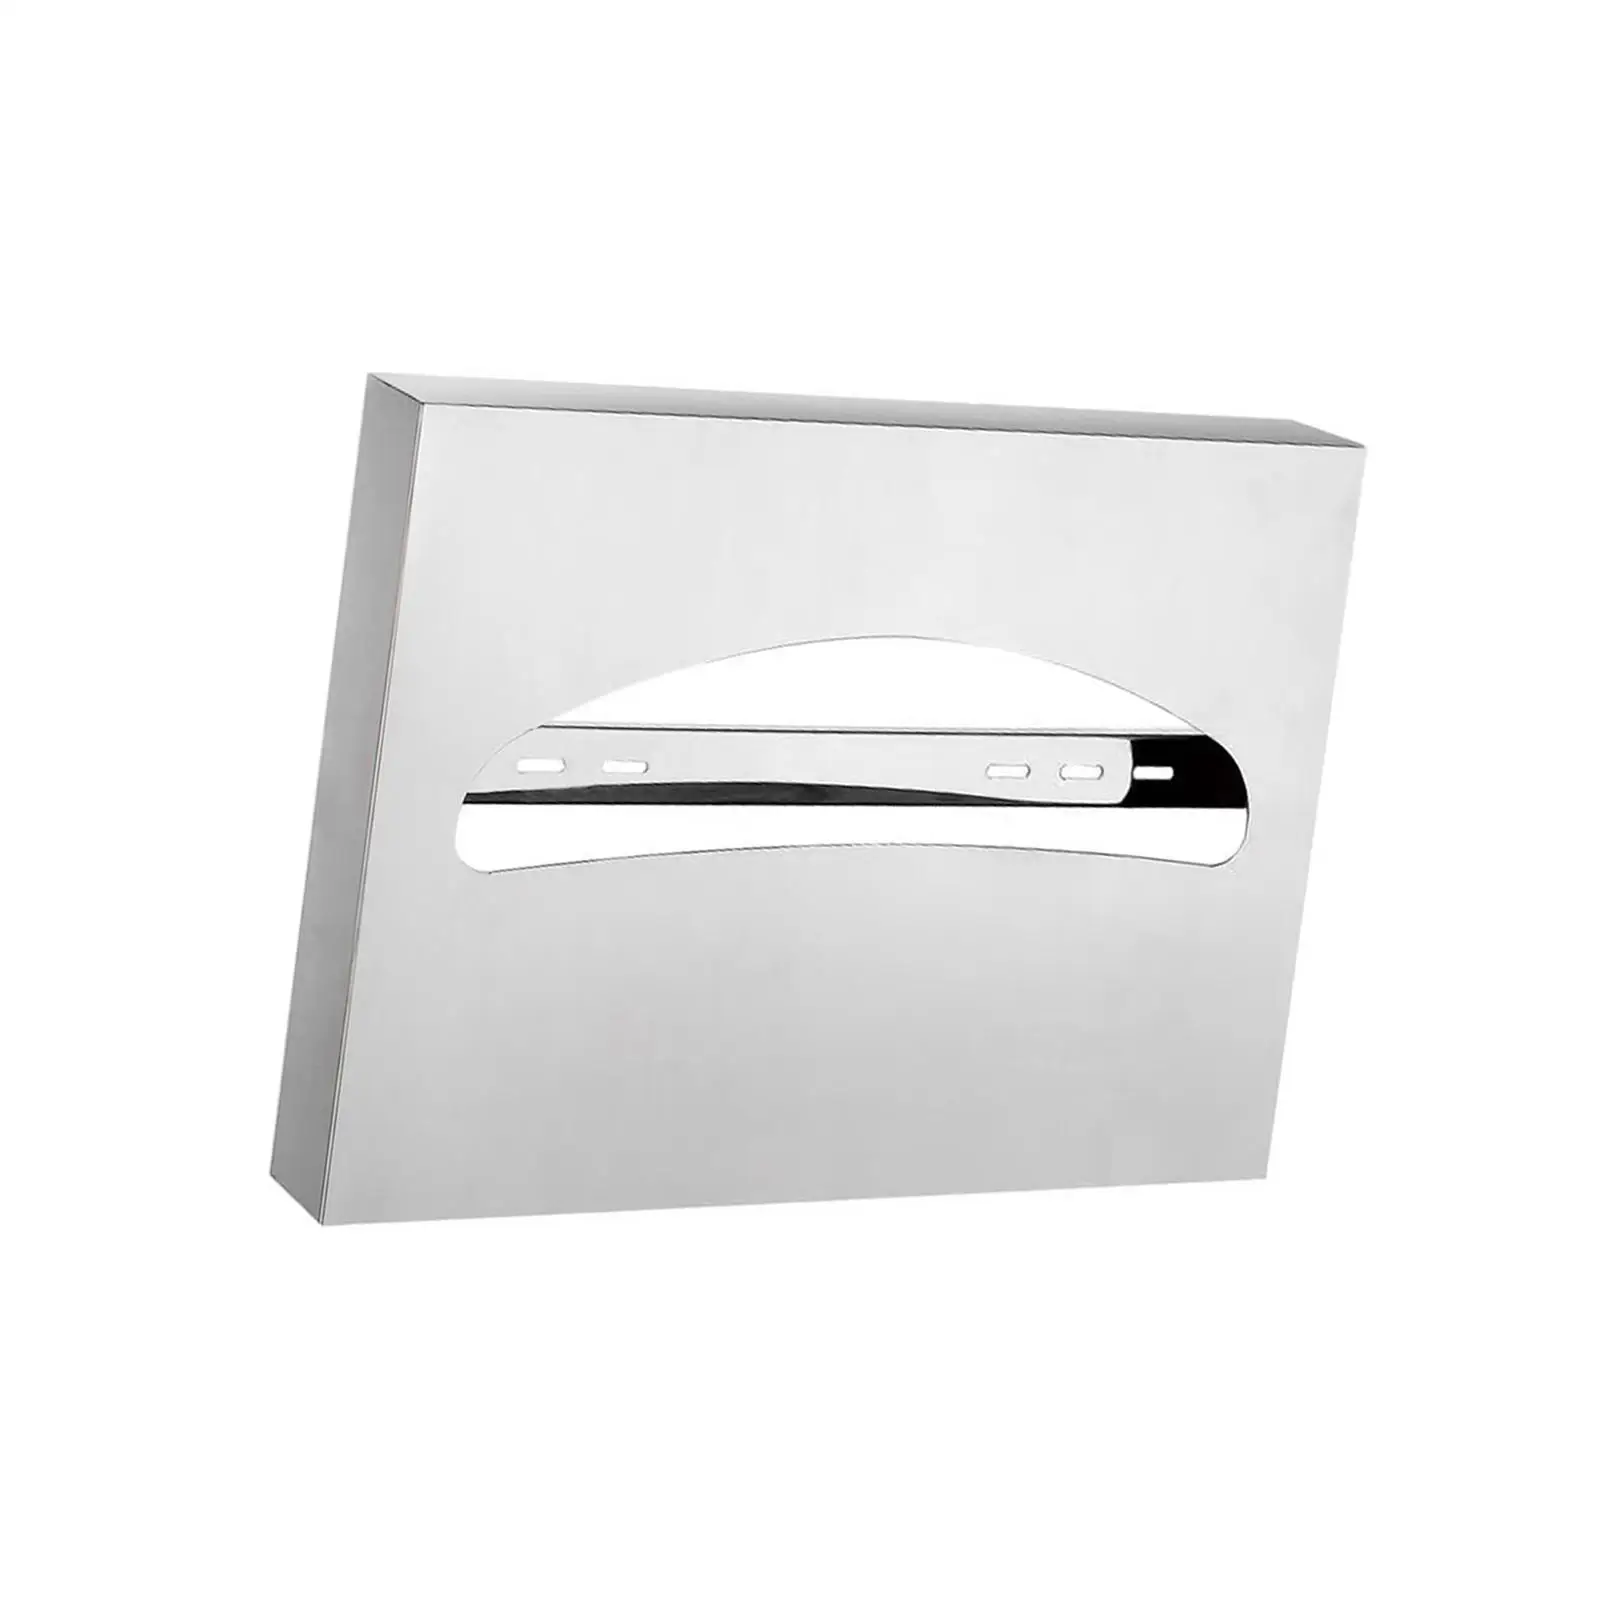 Toilet Seat Covers Dispenser Wall Mounted for Office Restaurants Bathroom